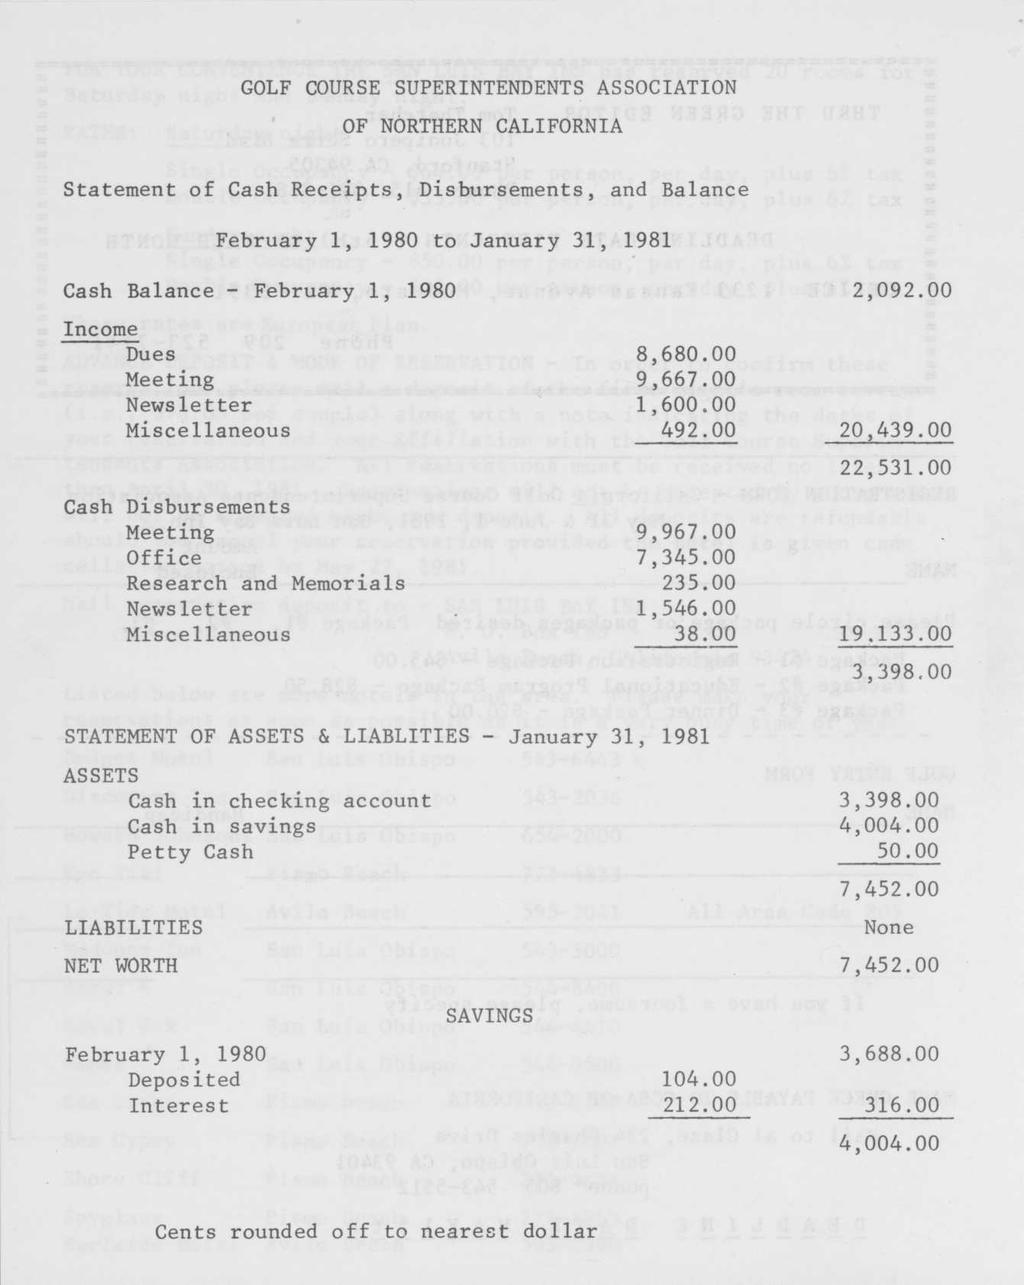 GOLF COURSE SUPERINTENDENTS ASSOCIATION OF NORTHERN CALIFORNIA Statement of Cash Receipts, Disbursements, and Balance February 1, 1980 to January 31, 1981 Cash Balance - February 1, 1980 2,092.